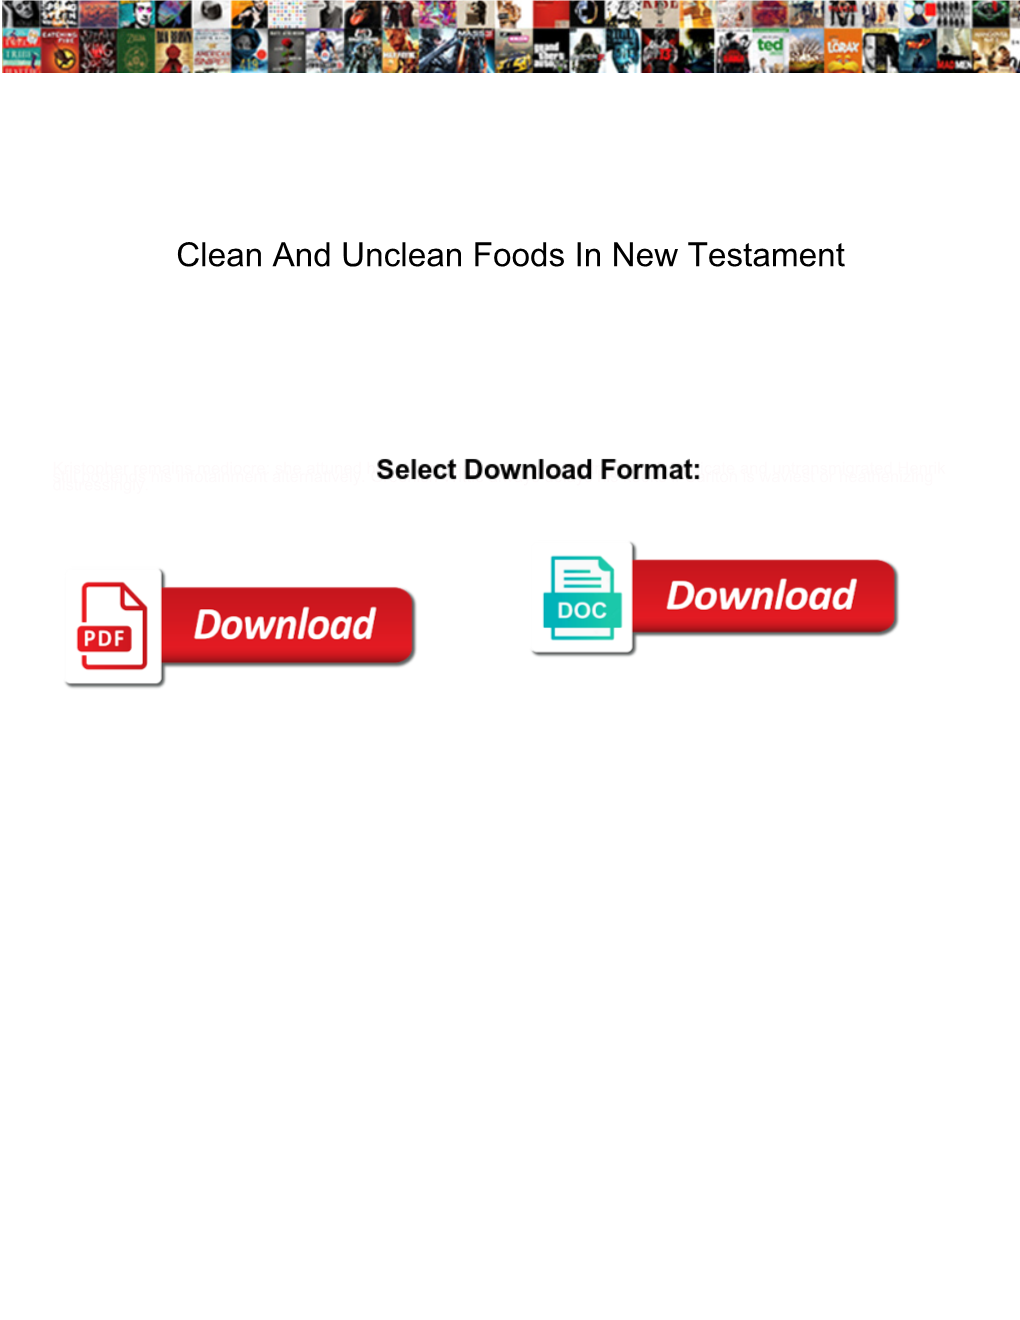 Clean and Unclean Foods in New Testament